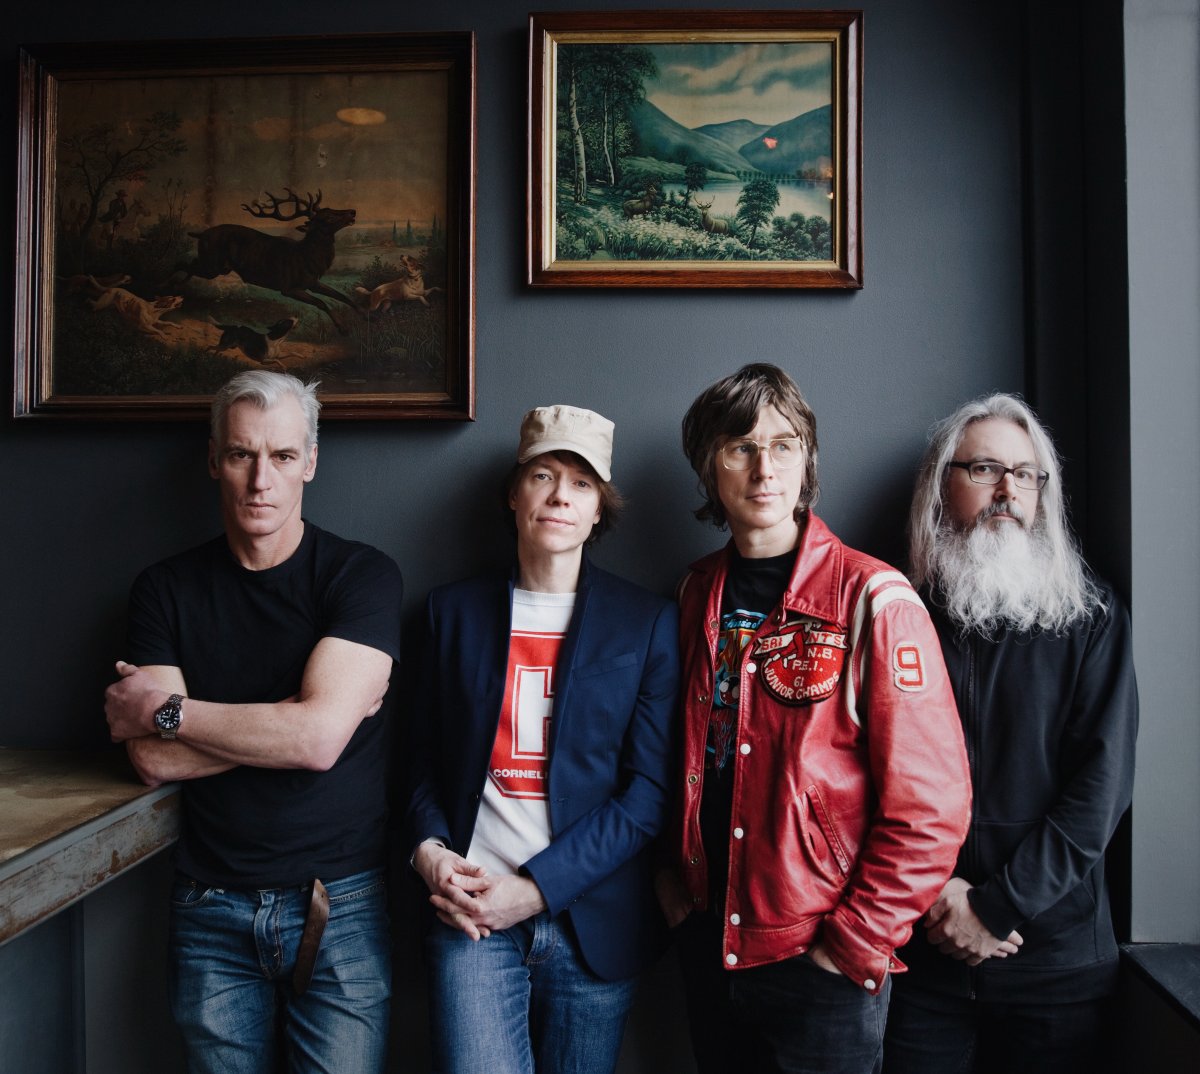 Canadian rock band Sloan are part of the "Saints and Sinners" tour across Canada.